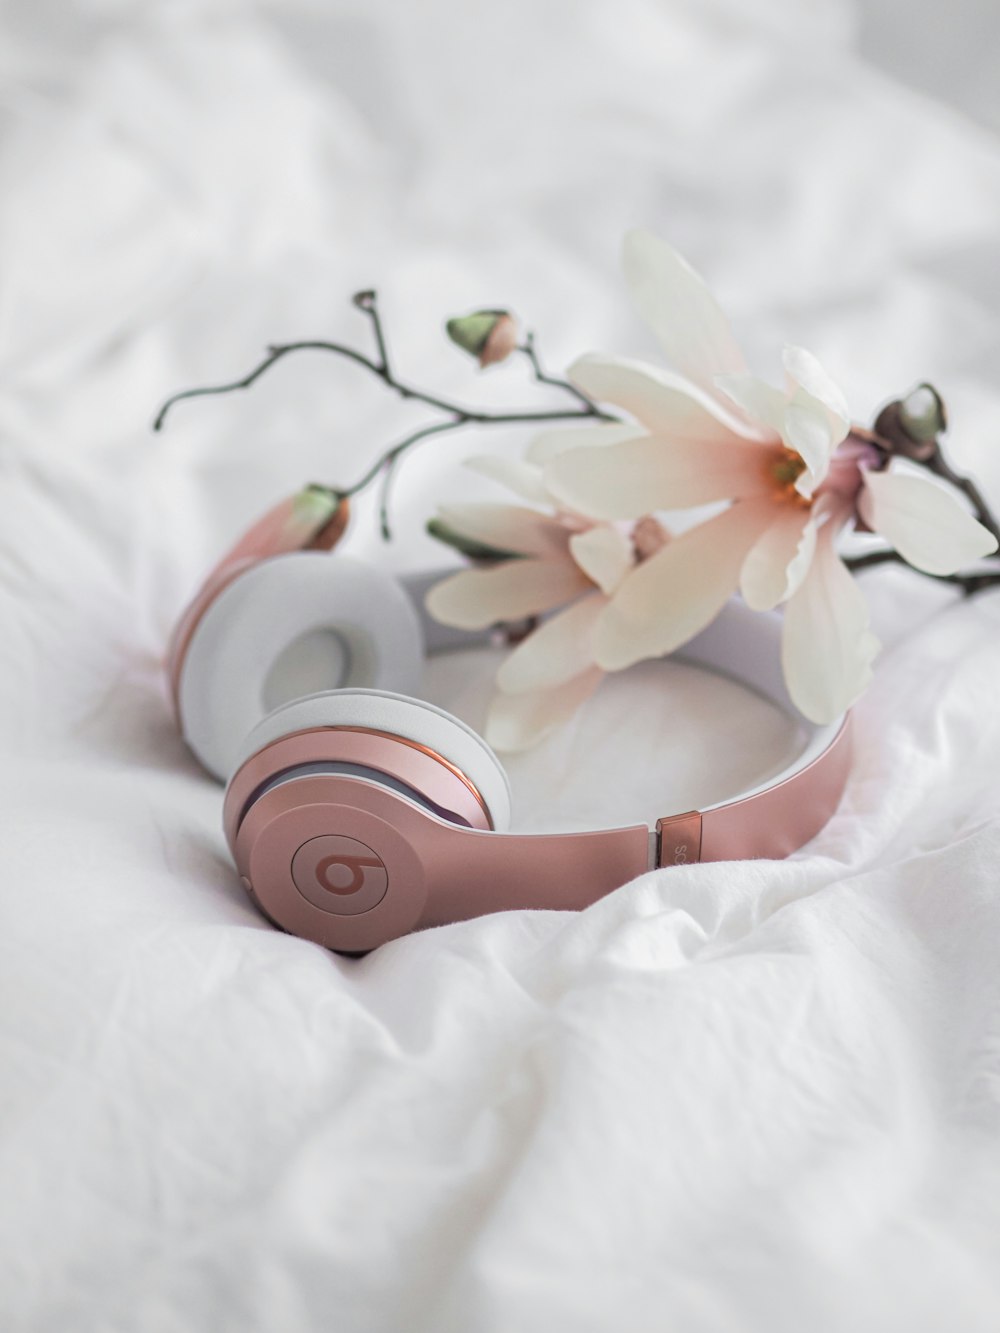 pink beats by dr dre headphones on white textile